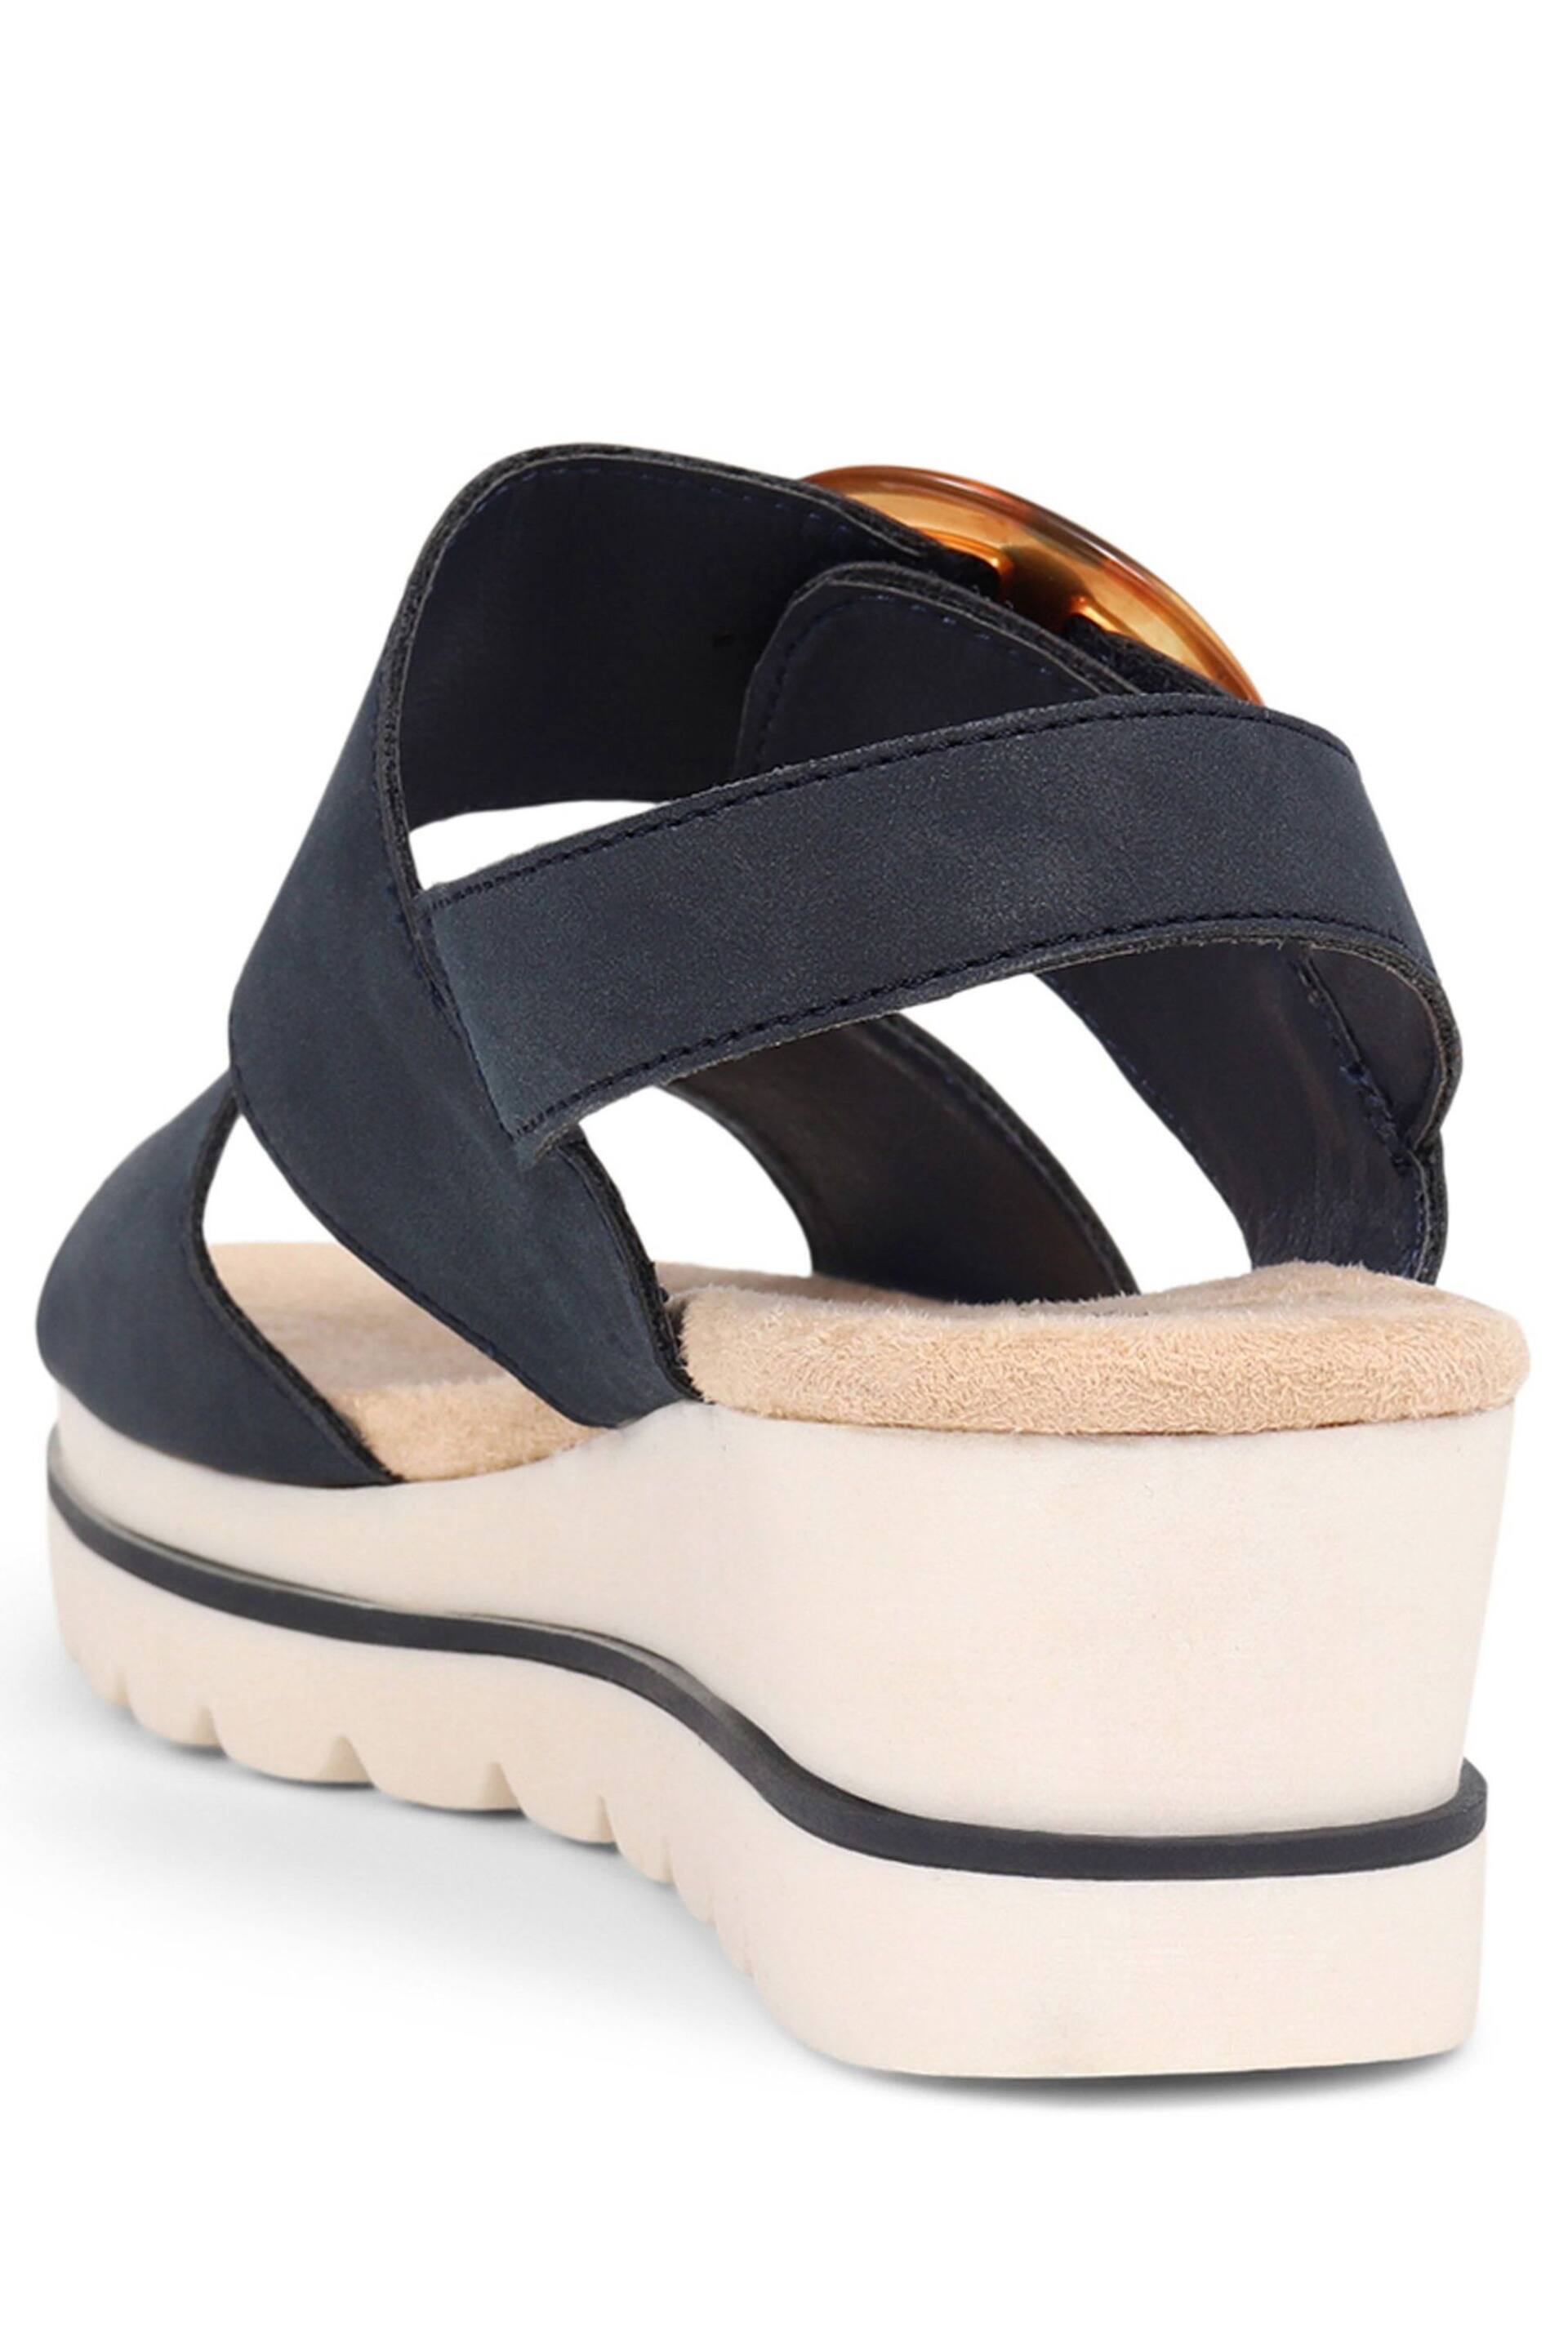 Pavers Touch Fasten Platform Sandals - Image 4 of 5